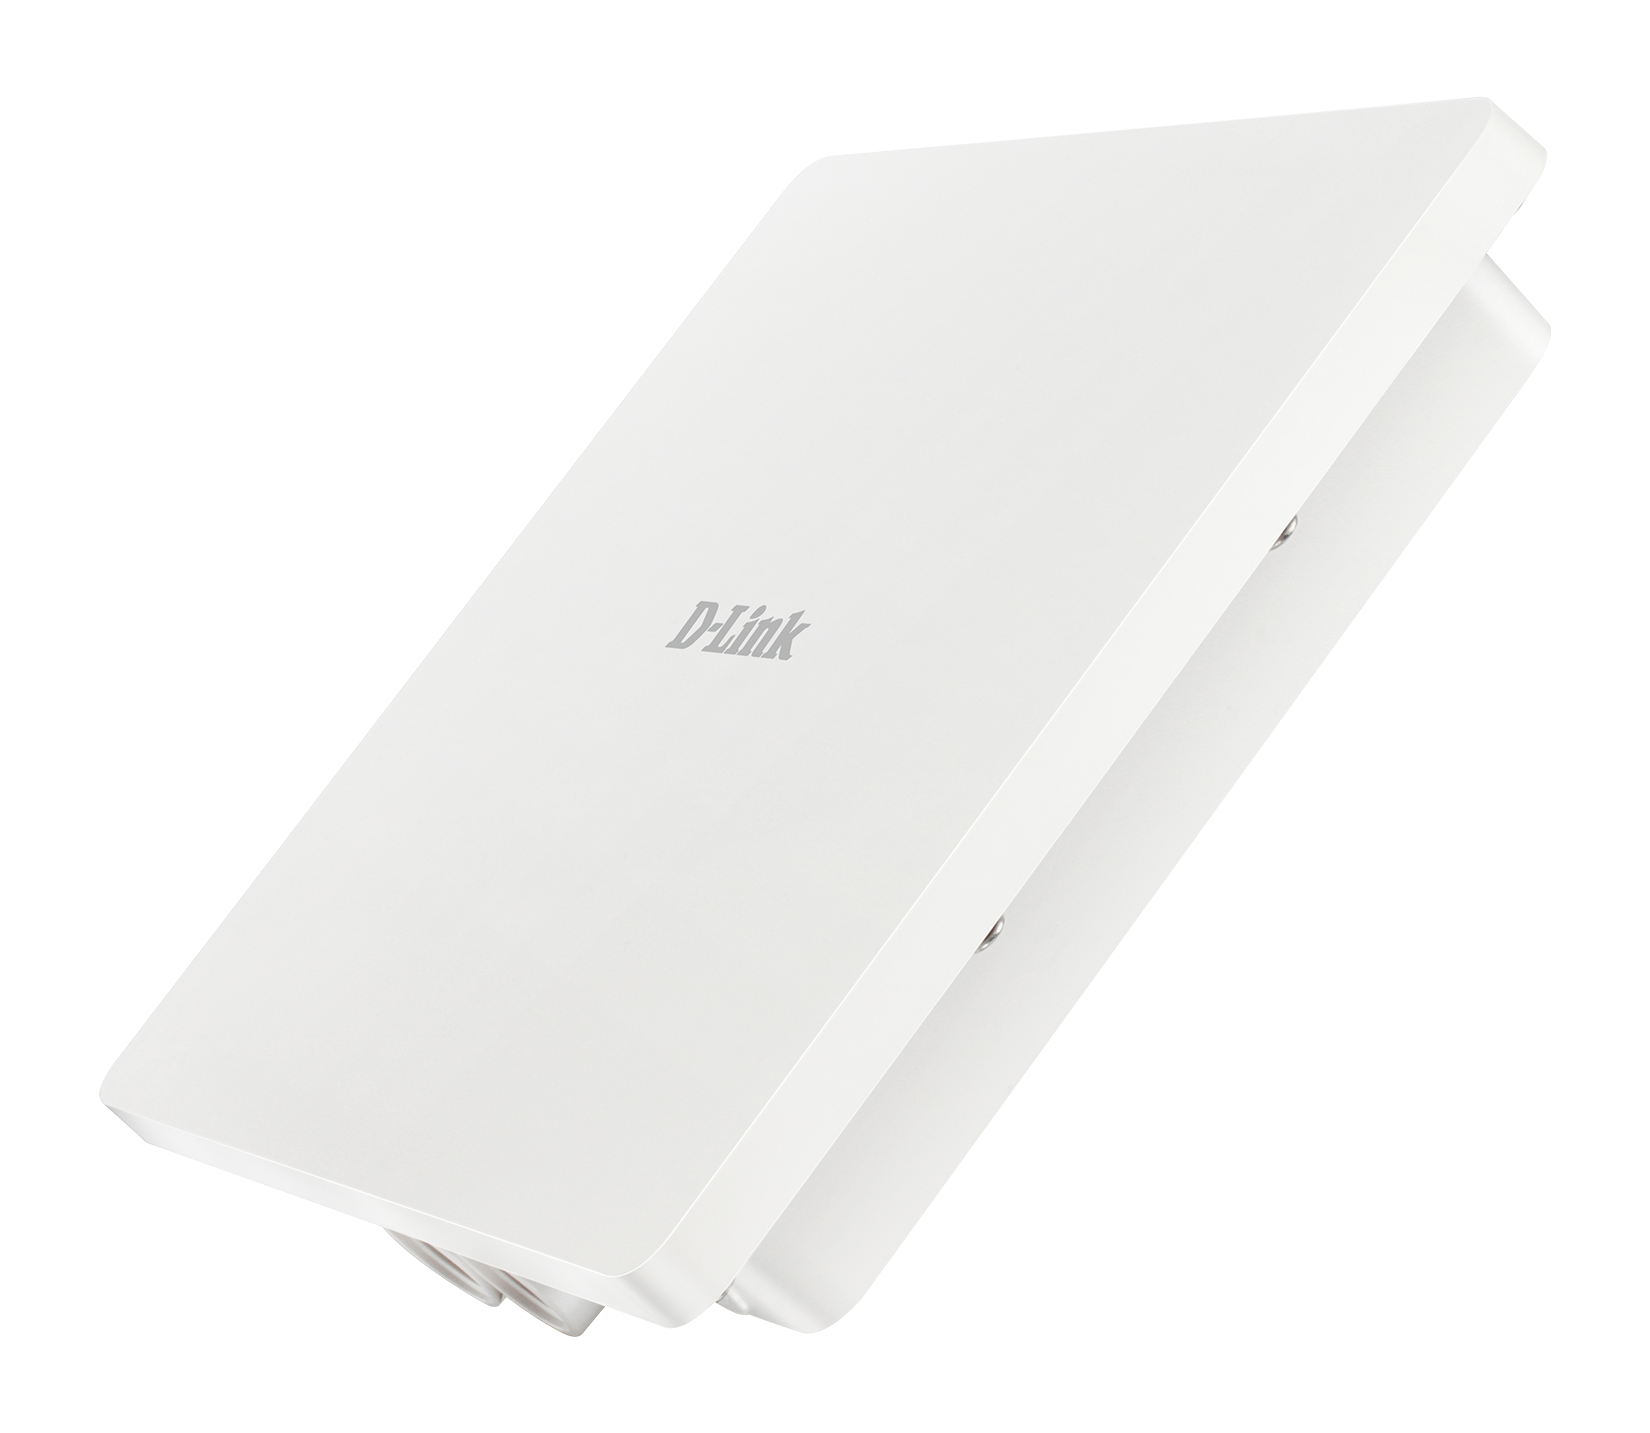 DAP-3666 Wireless AC1200 Wave 2 Dual-Band Outdoor PoE Access Point - Left Side Angled